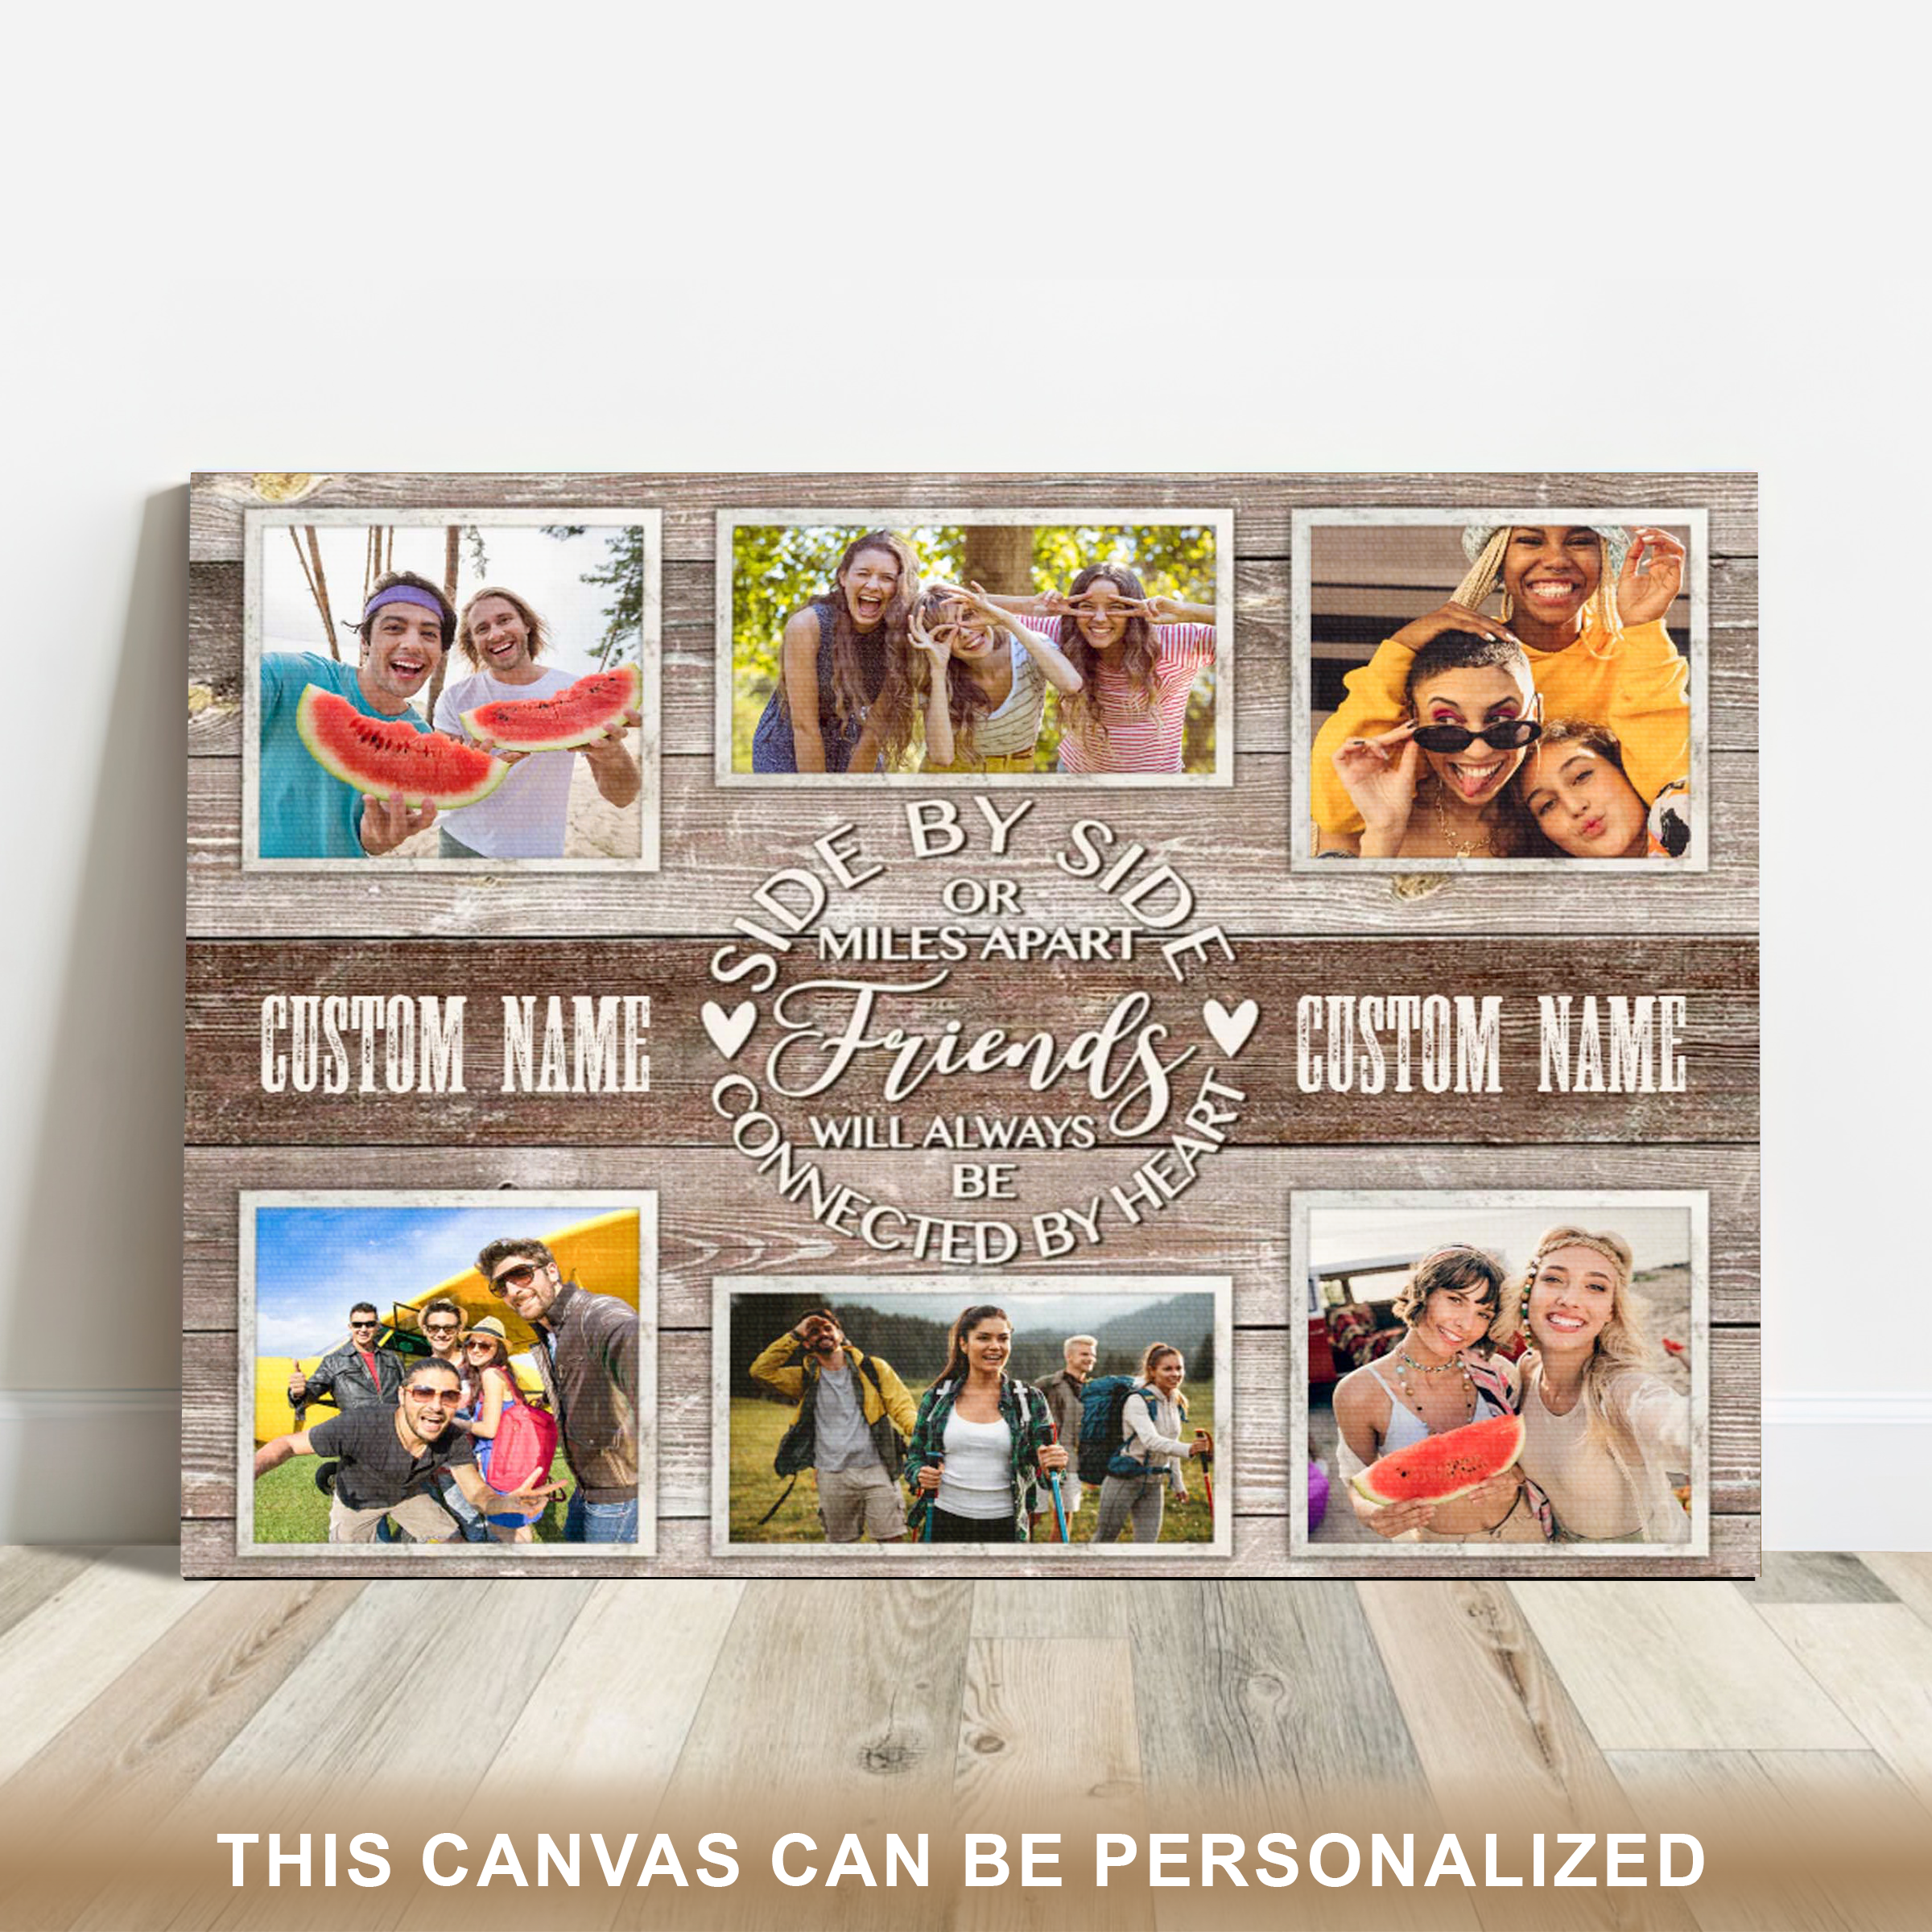 Personalized Gifts Canada | Customized Gifts Canada - FNP